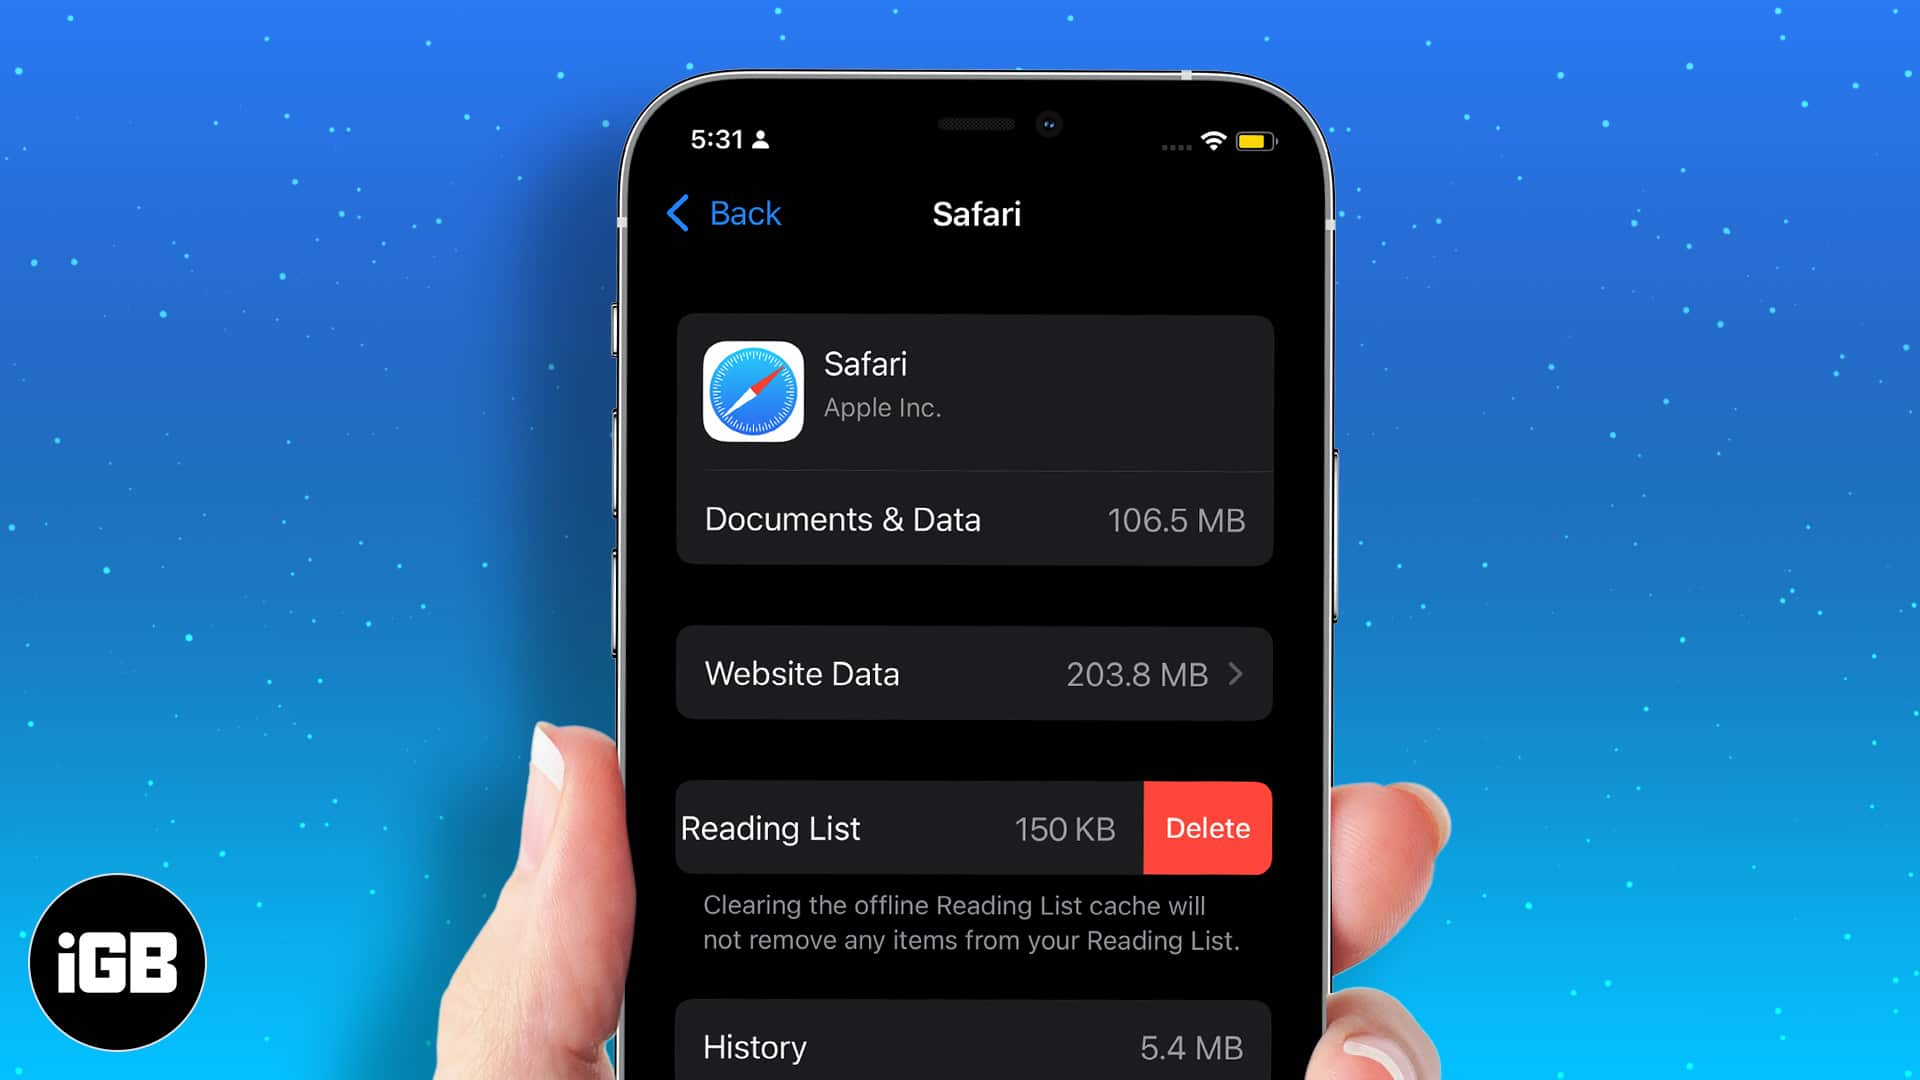 How to clear safari offline reading list cache on iphone